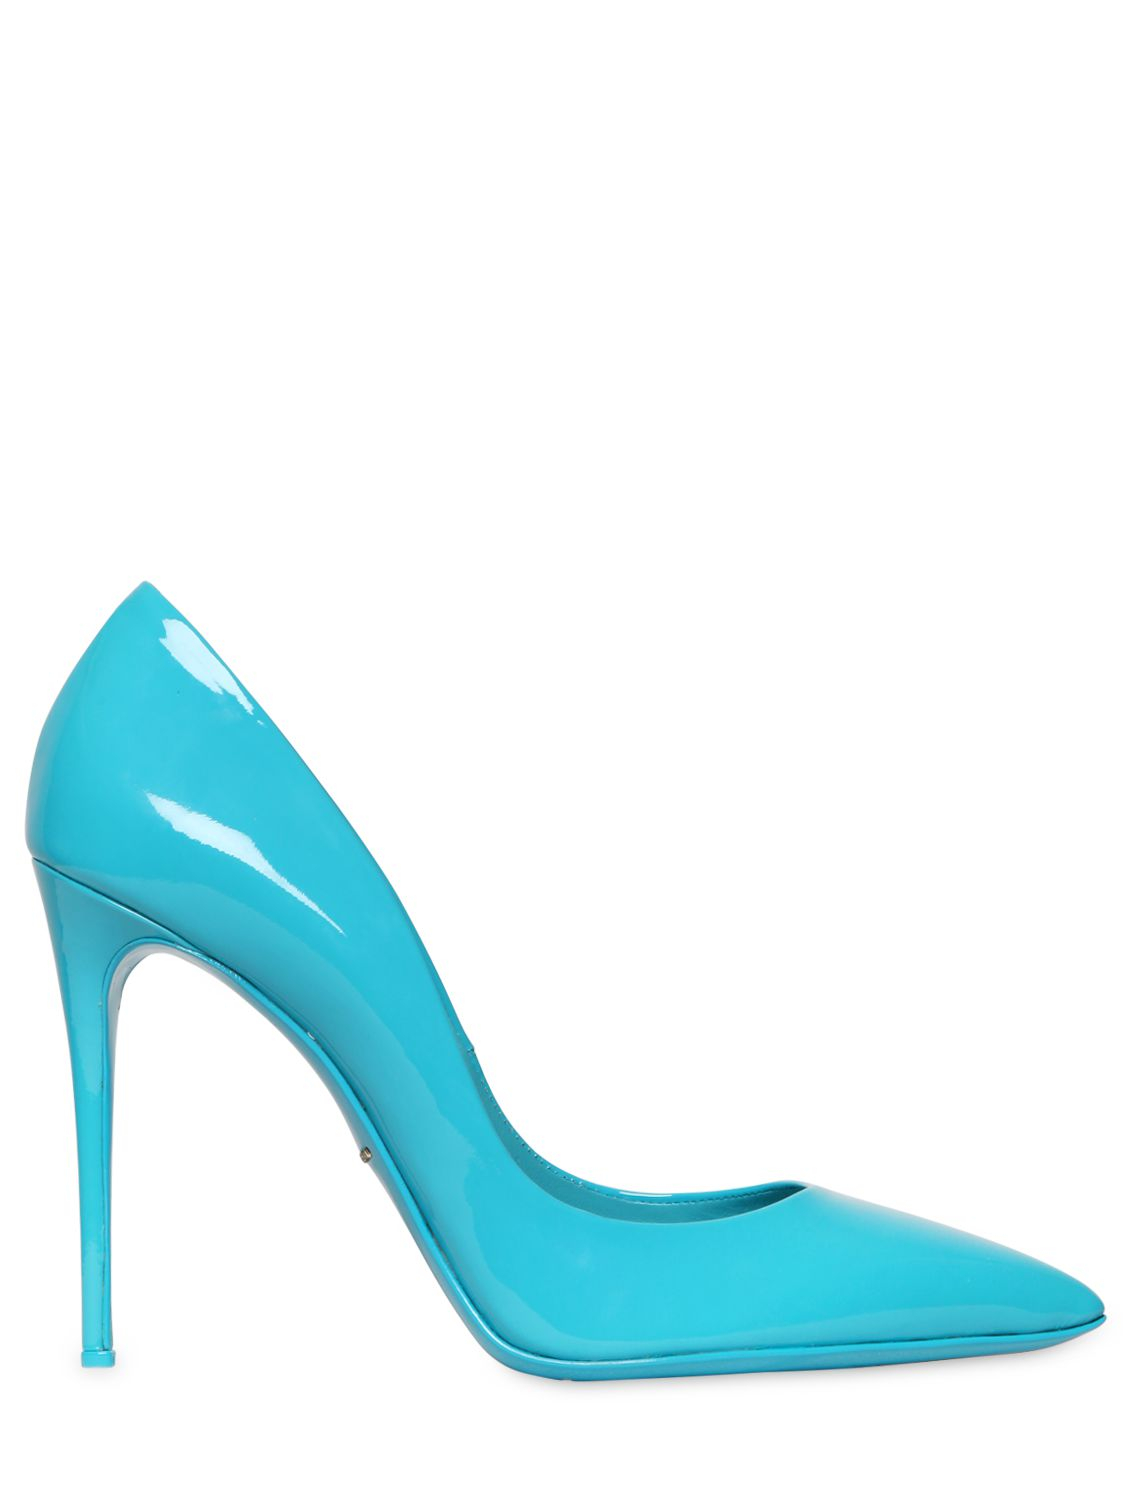 Lyst - Dolce & Gabbana 105mm Kate Patent Leather Pumps in Blue